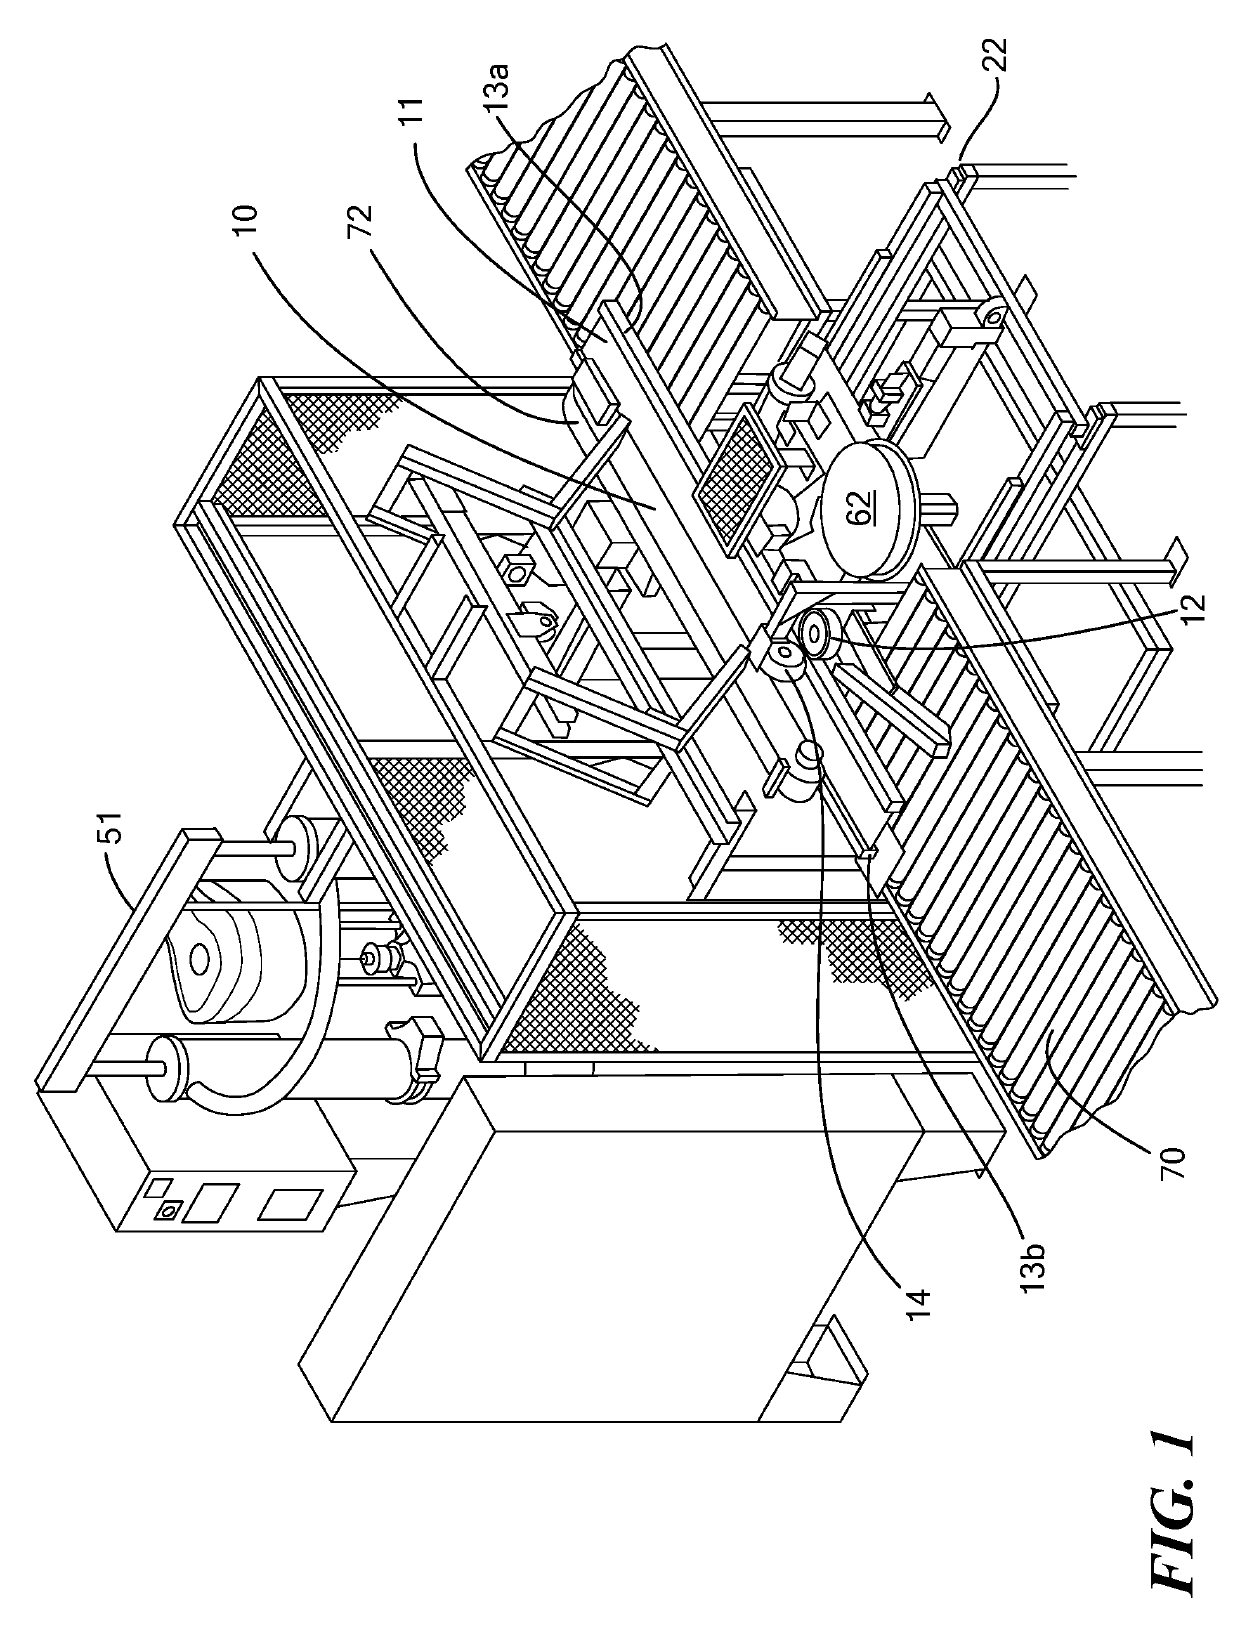 Adhesive and release liner application system